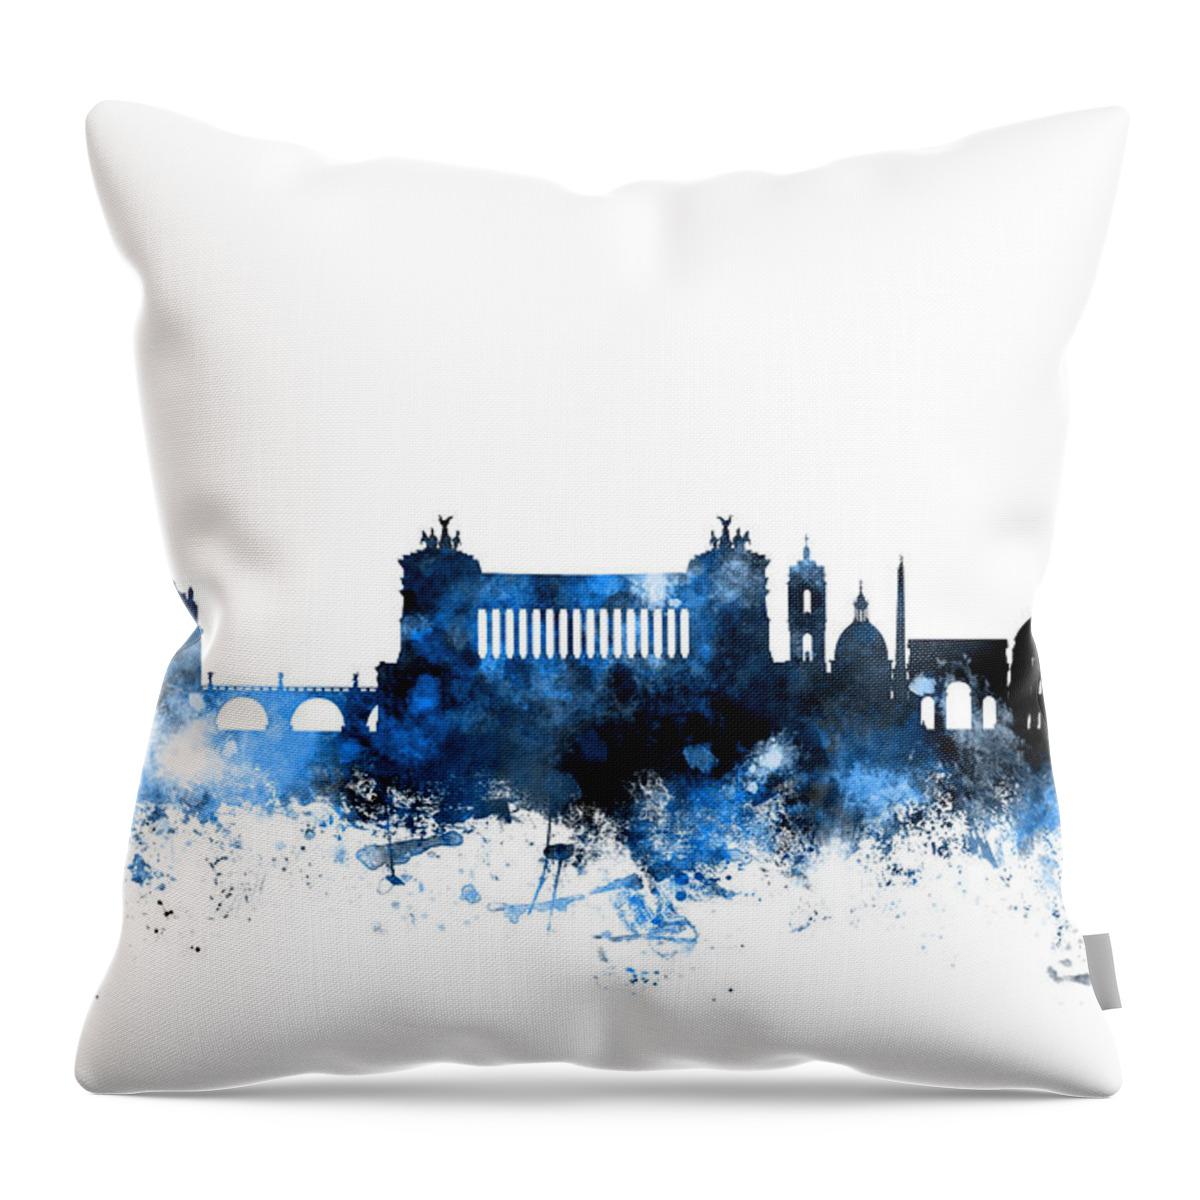 Italy Throw Pillow featuring the digital art Rome Italy Skyline by Michael Tompsett